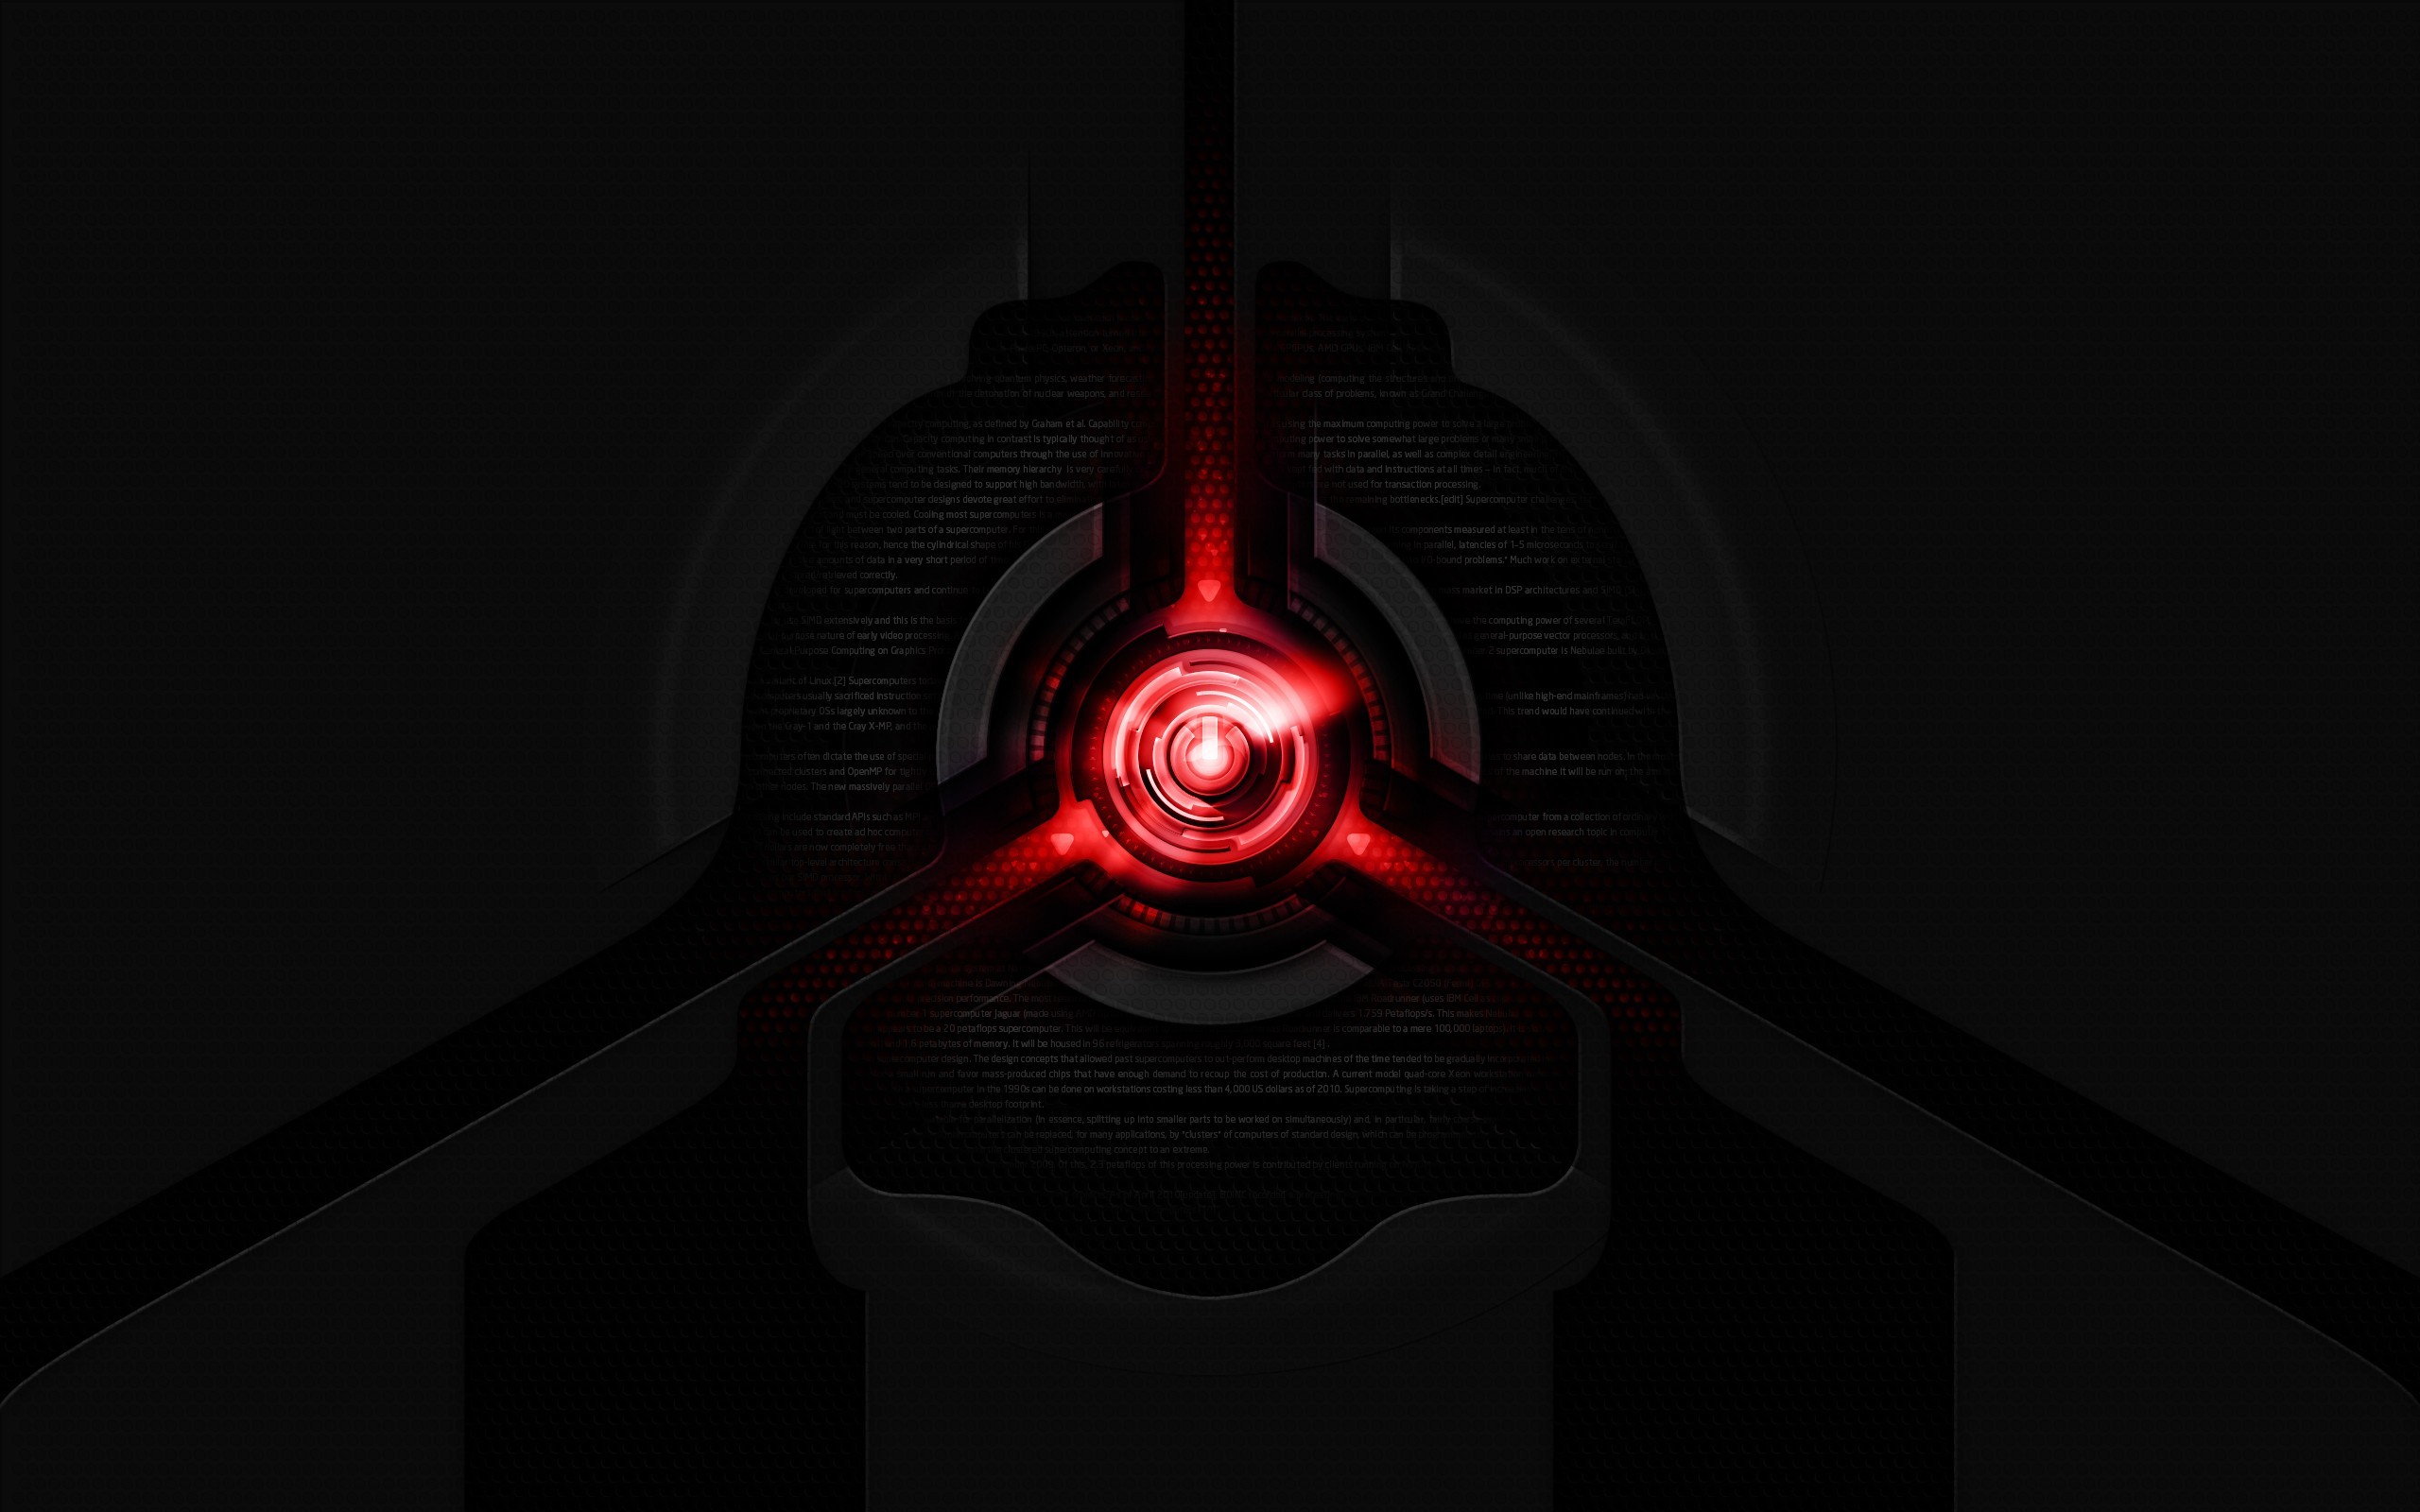 2560x1600 Cool Red And Black Themes 17 Widescreen Wallpaper. Cool Red And Black  Themes 17 Widescreen Wallpaper